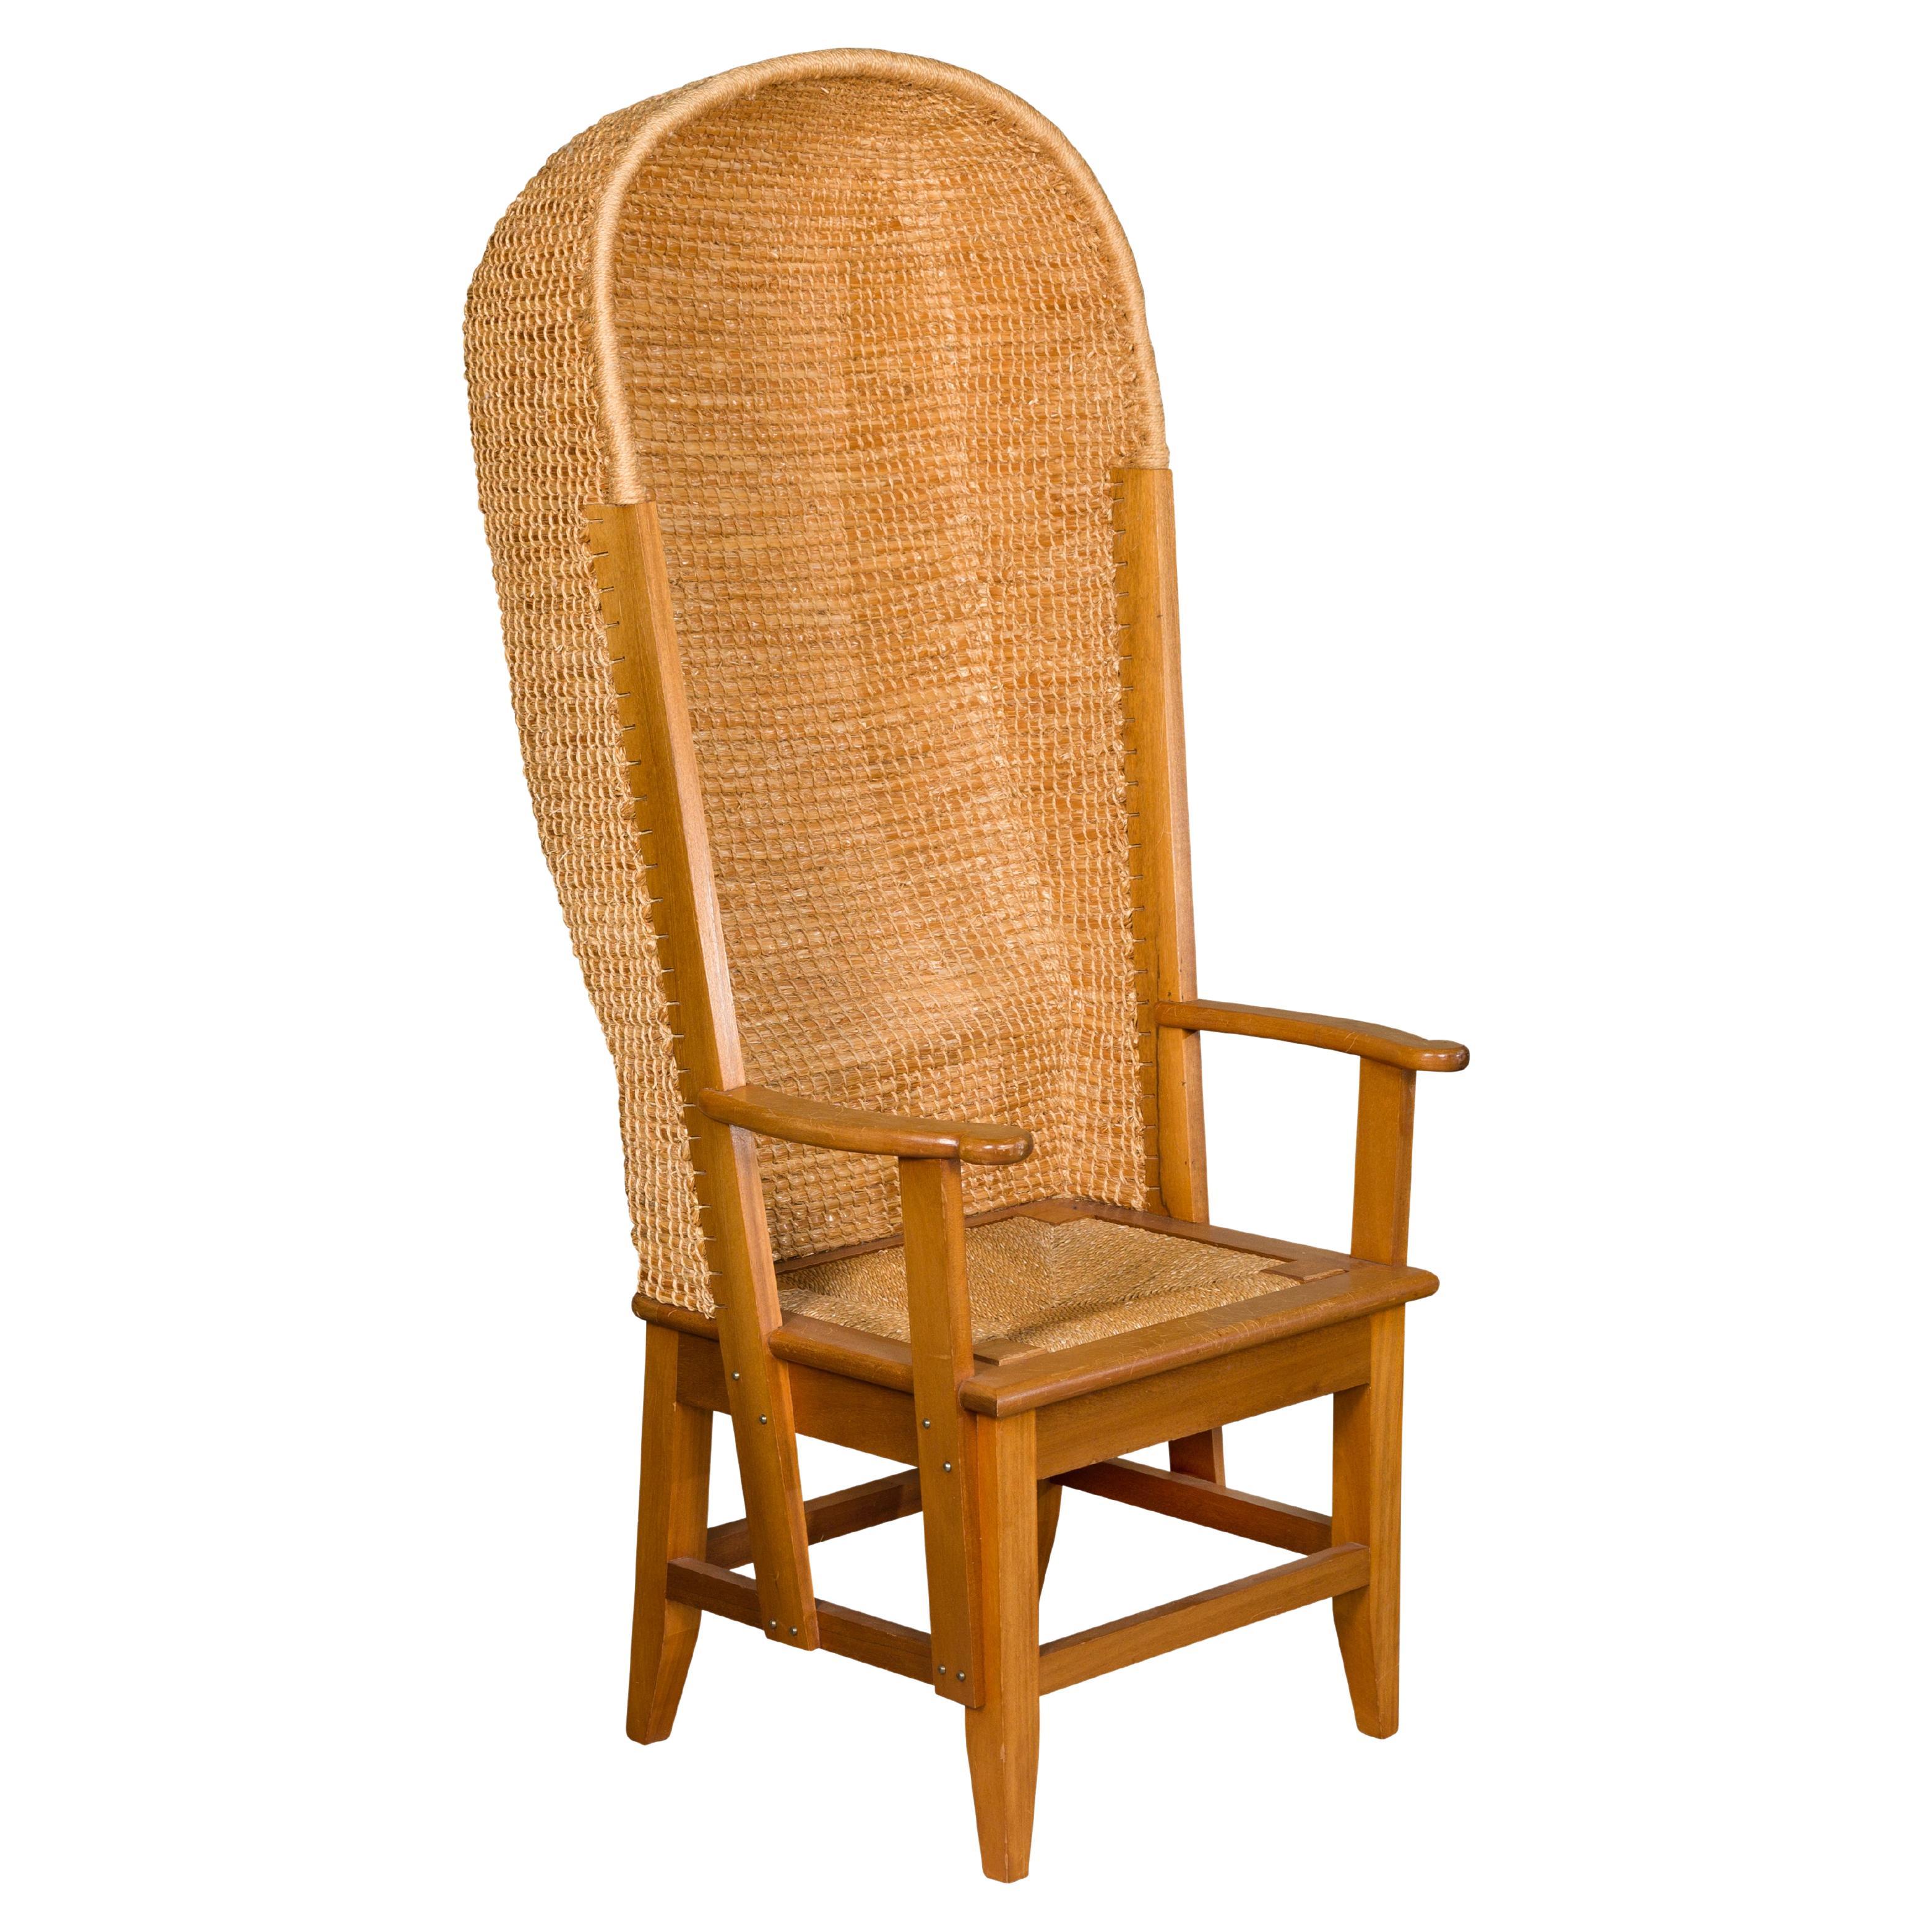 Orkney Island Midcentury Scottish Canopy Chair with Hand Woven Straw Back For Sale